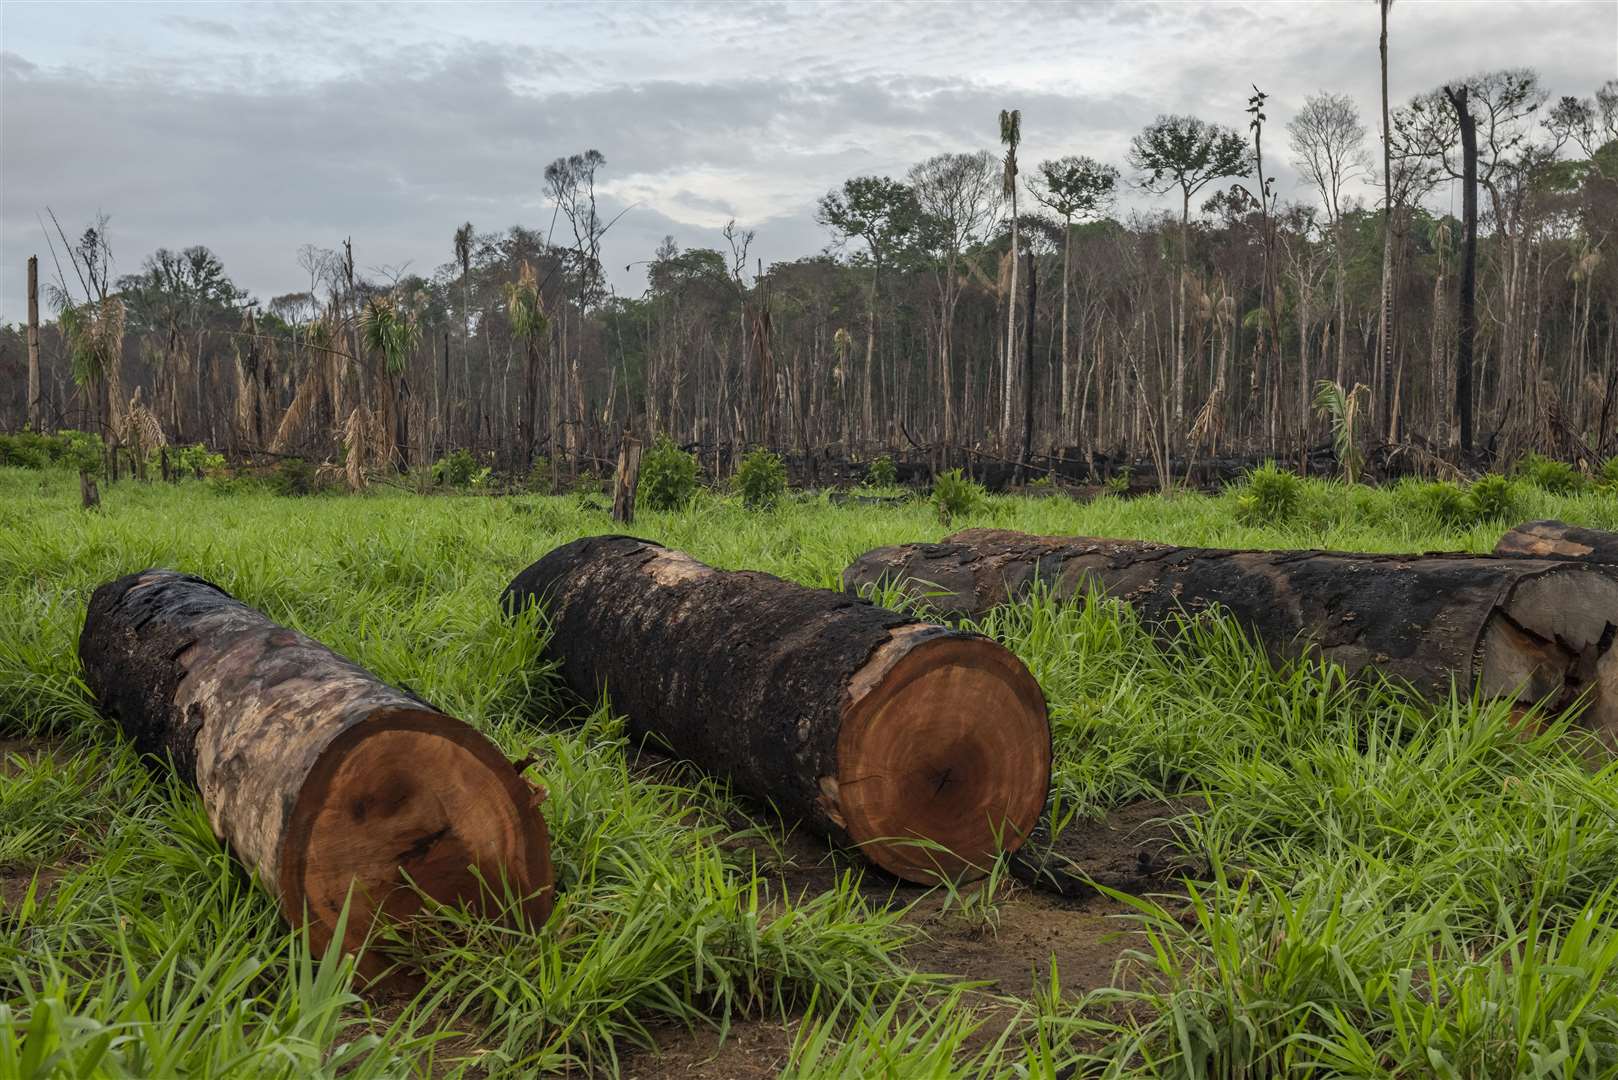 Tropical forest loss last year was 4.1 million hectares (Andre Dib/WWF)